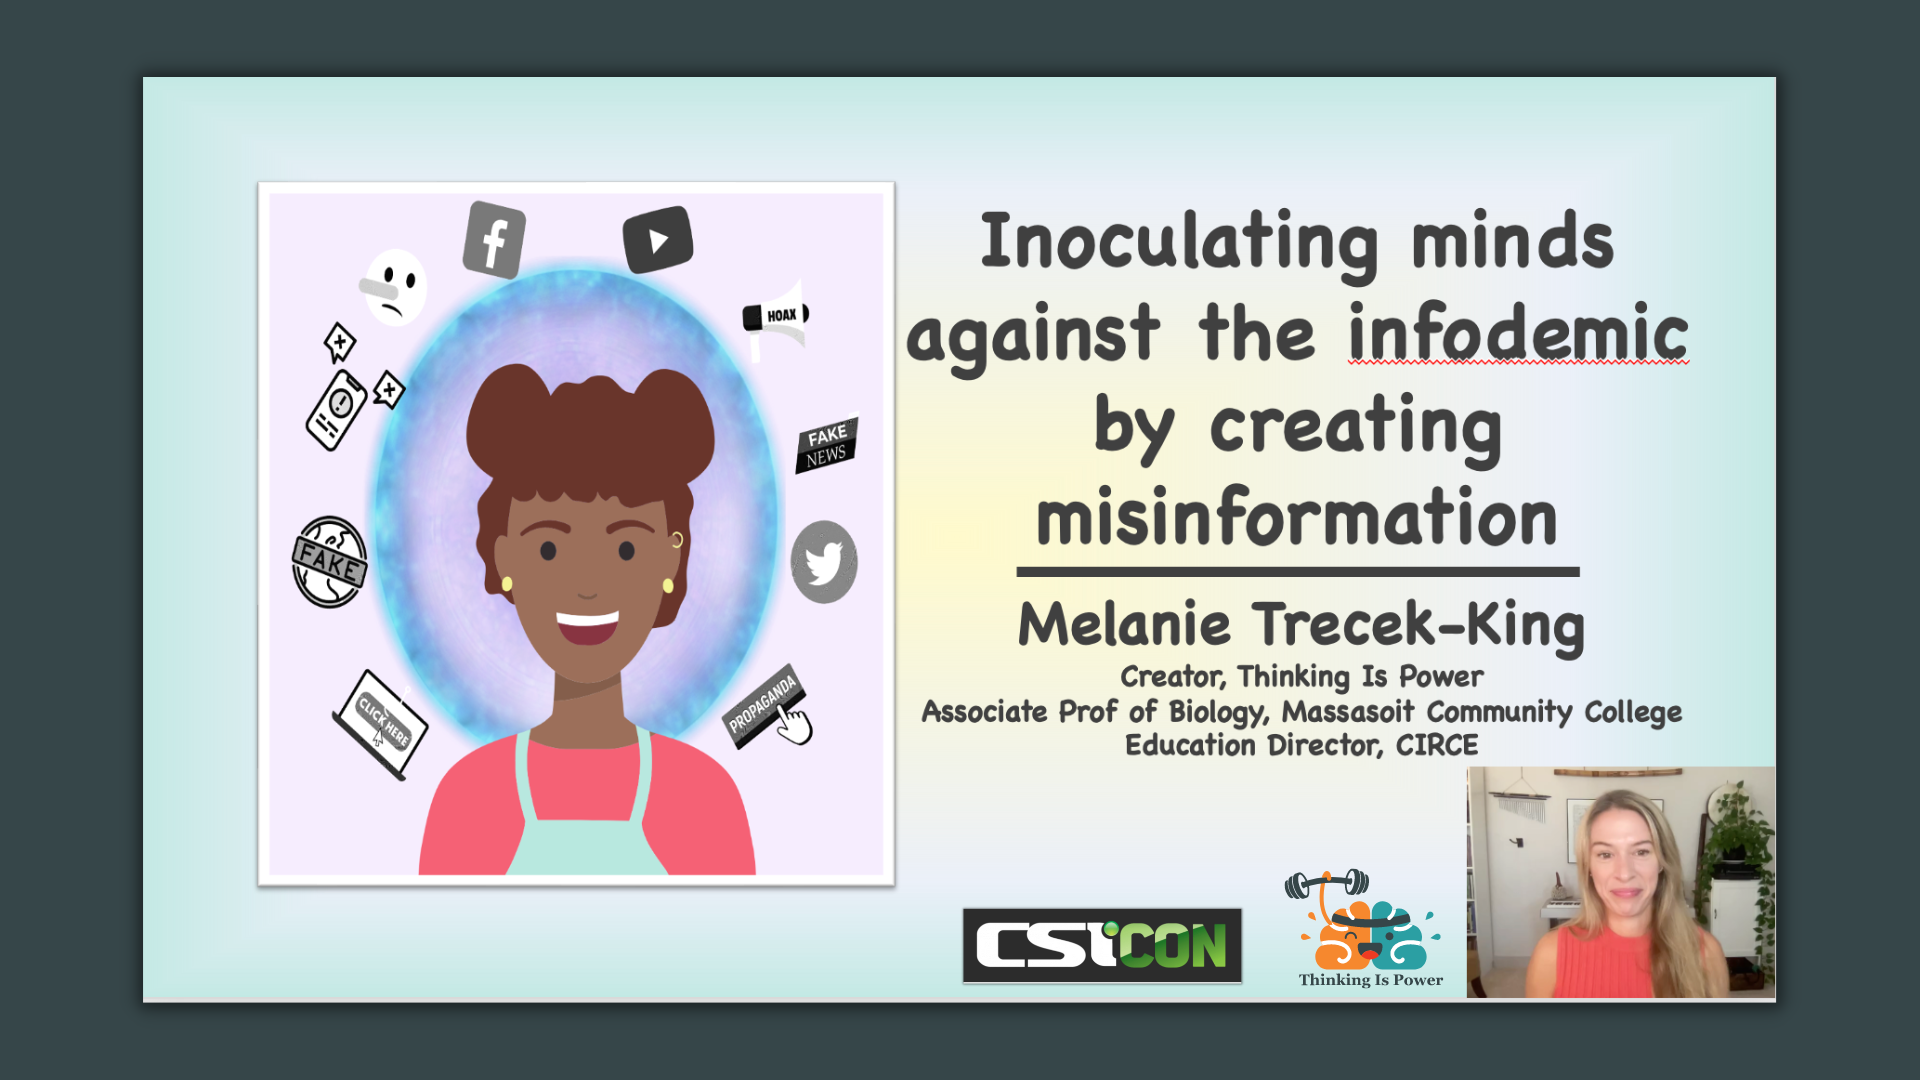 Melanie Trecek-King from Thinking Is Power presents "Inoculating minds against the infodemic by creating misinformation" at CSICon's Sunday Morning Papers session